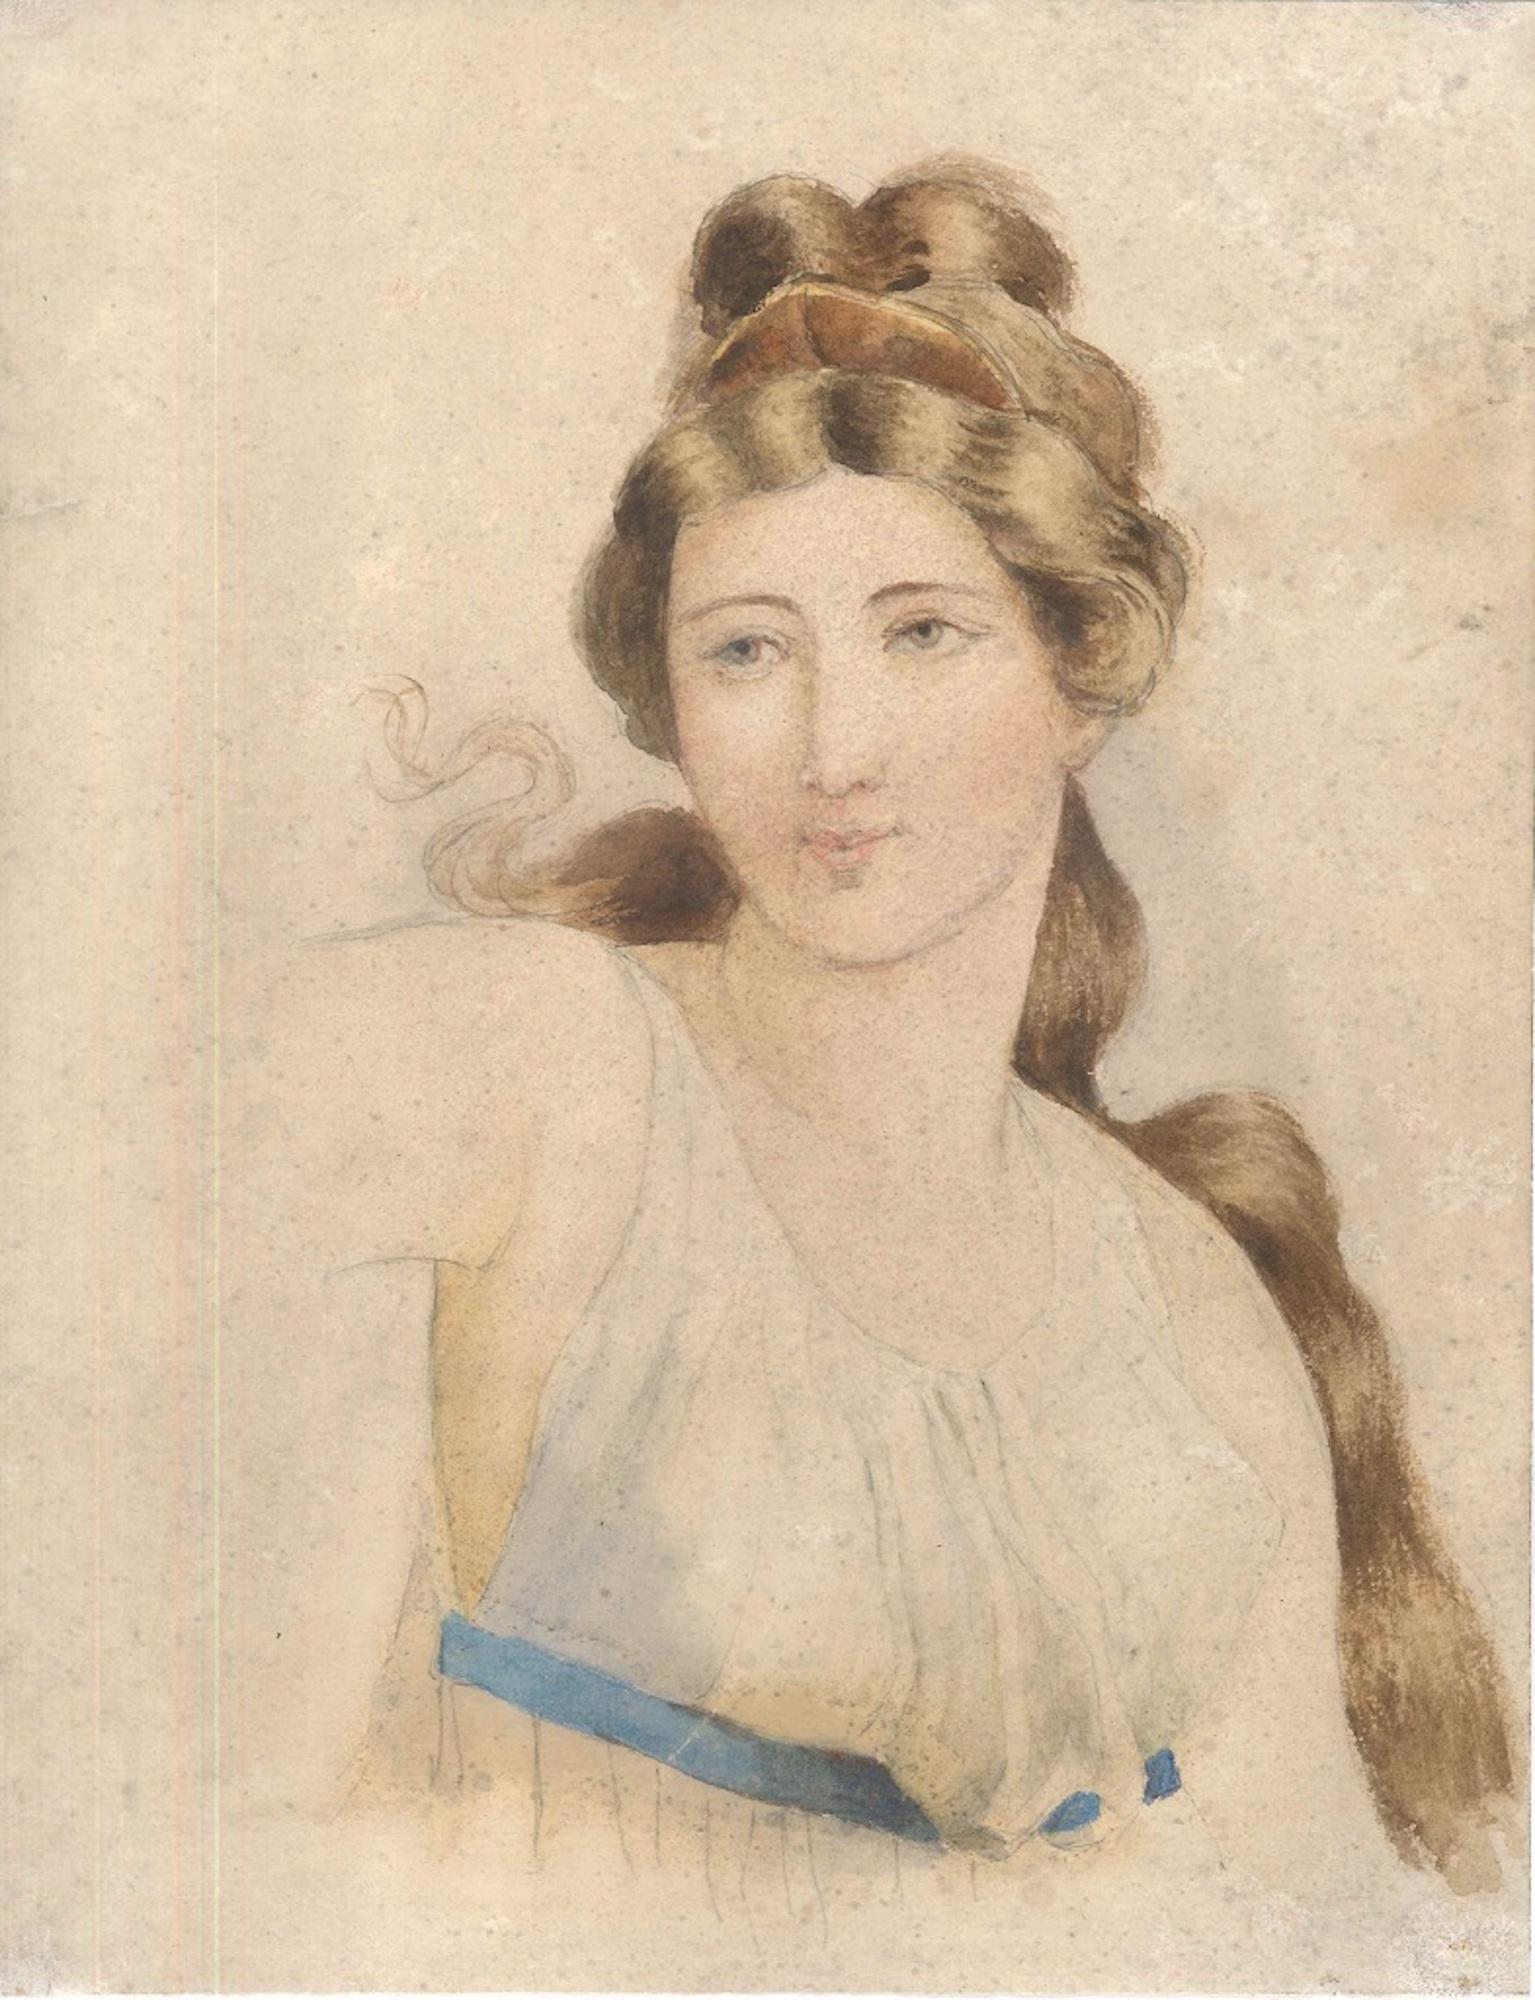 Unknown Portrait - Smiling Woman - Pencil and Watercolor Drawing on Paper - 18th century